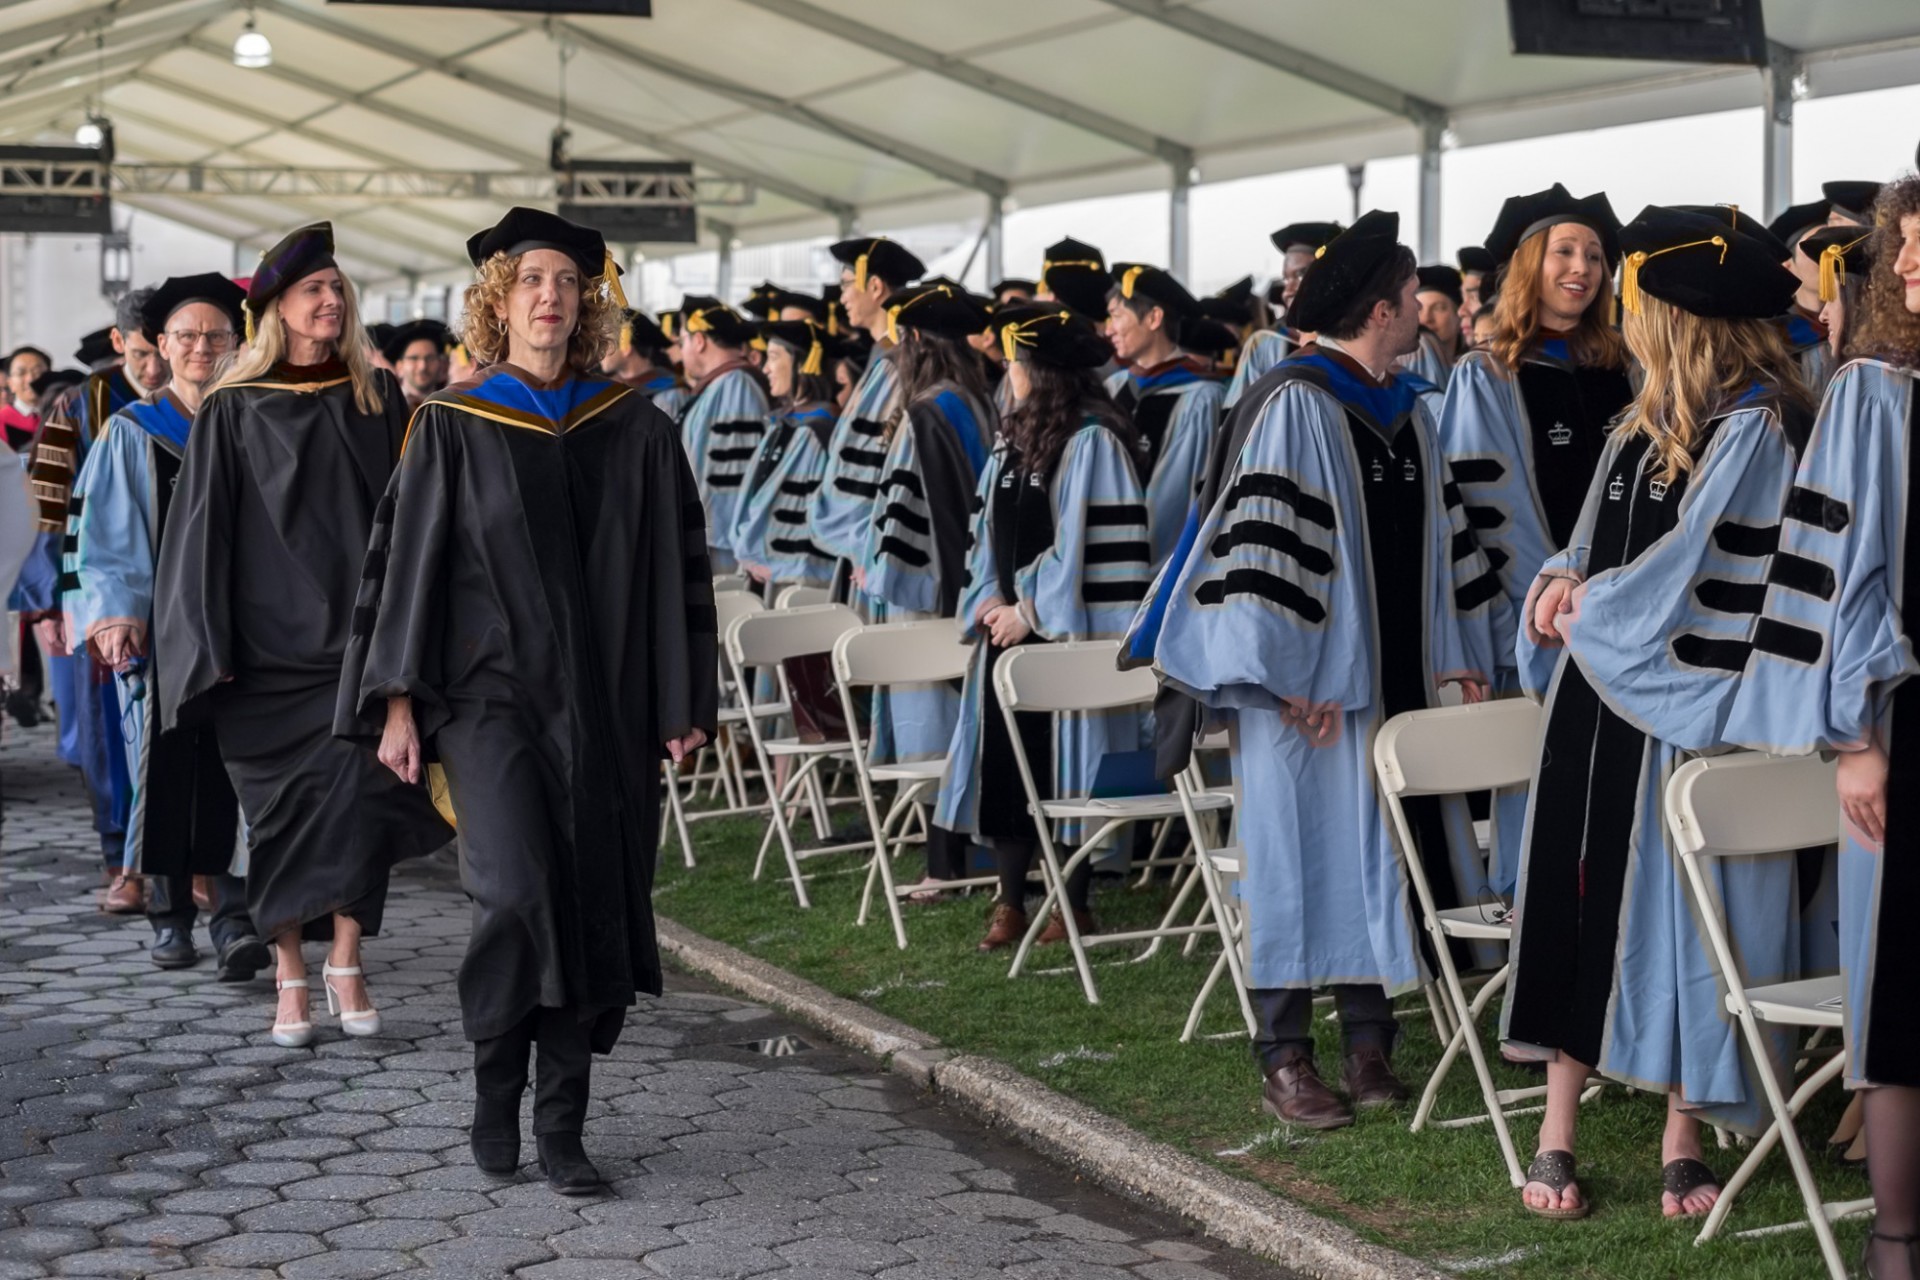 Andrea Solomon, vice dean of GSAS, leads the faculty procession at the start of the doctoral ceremony.